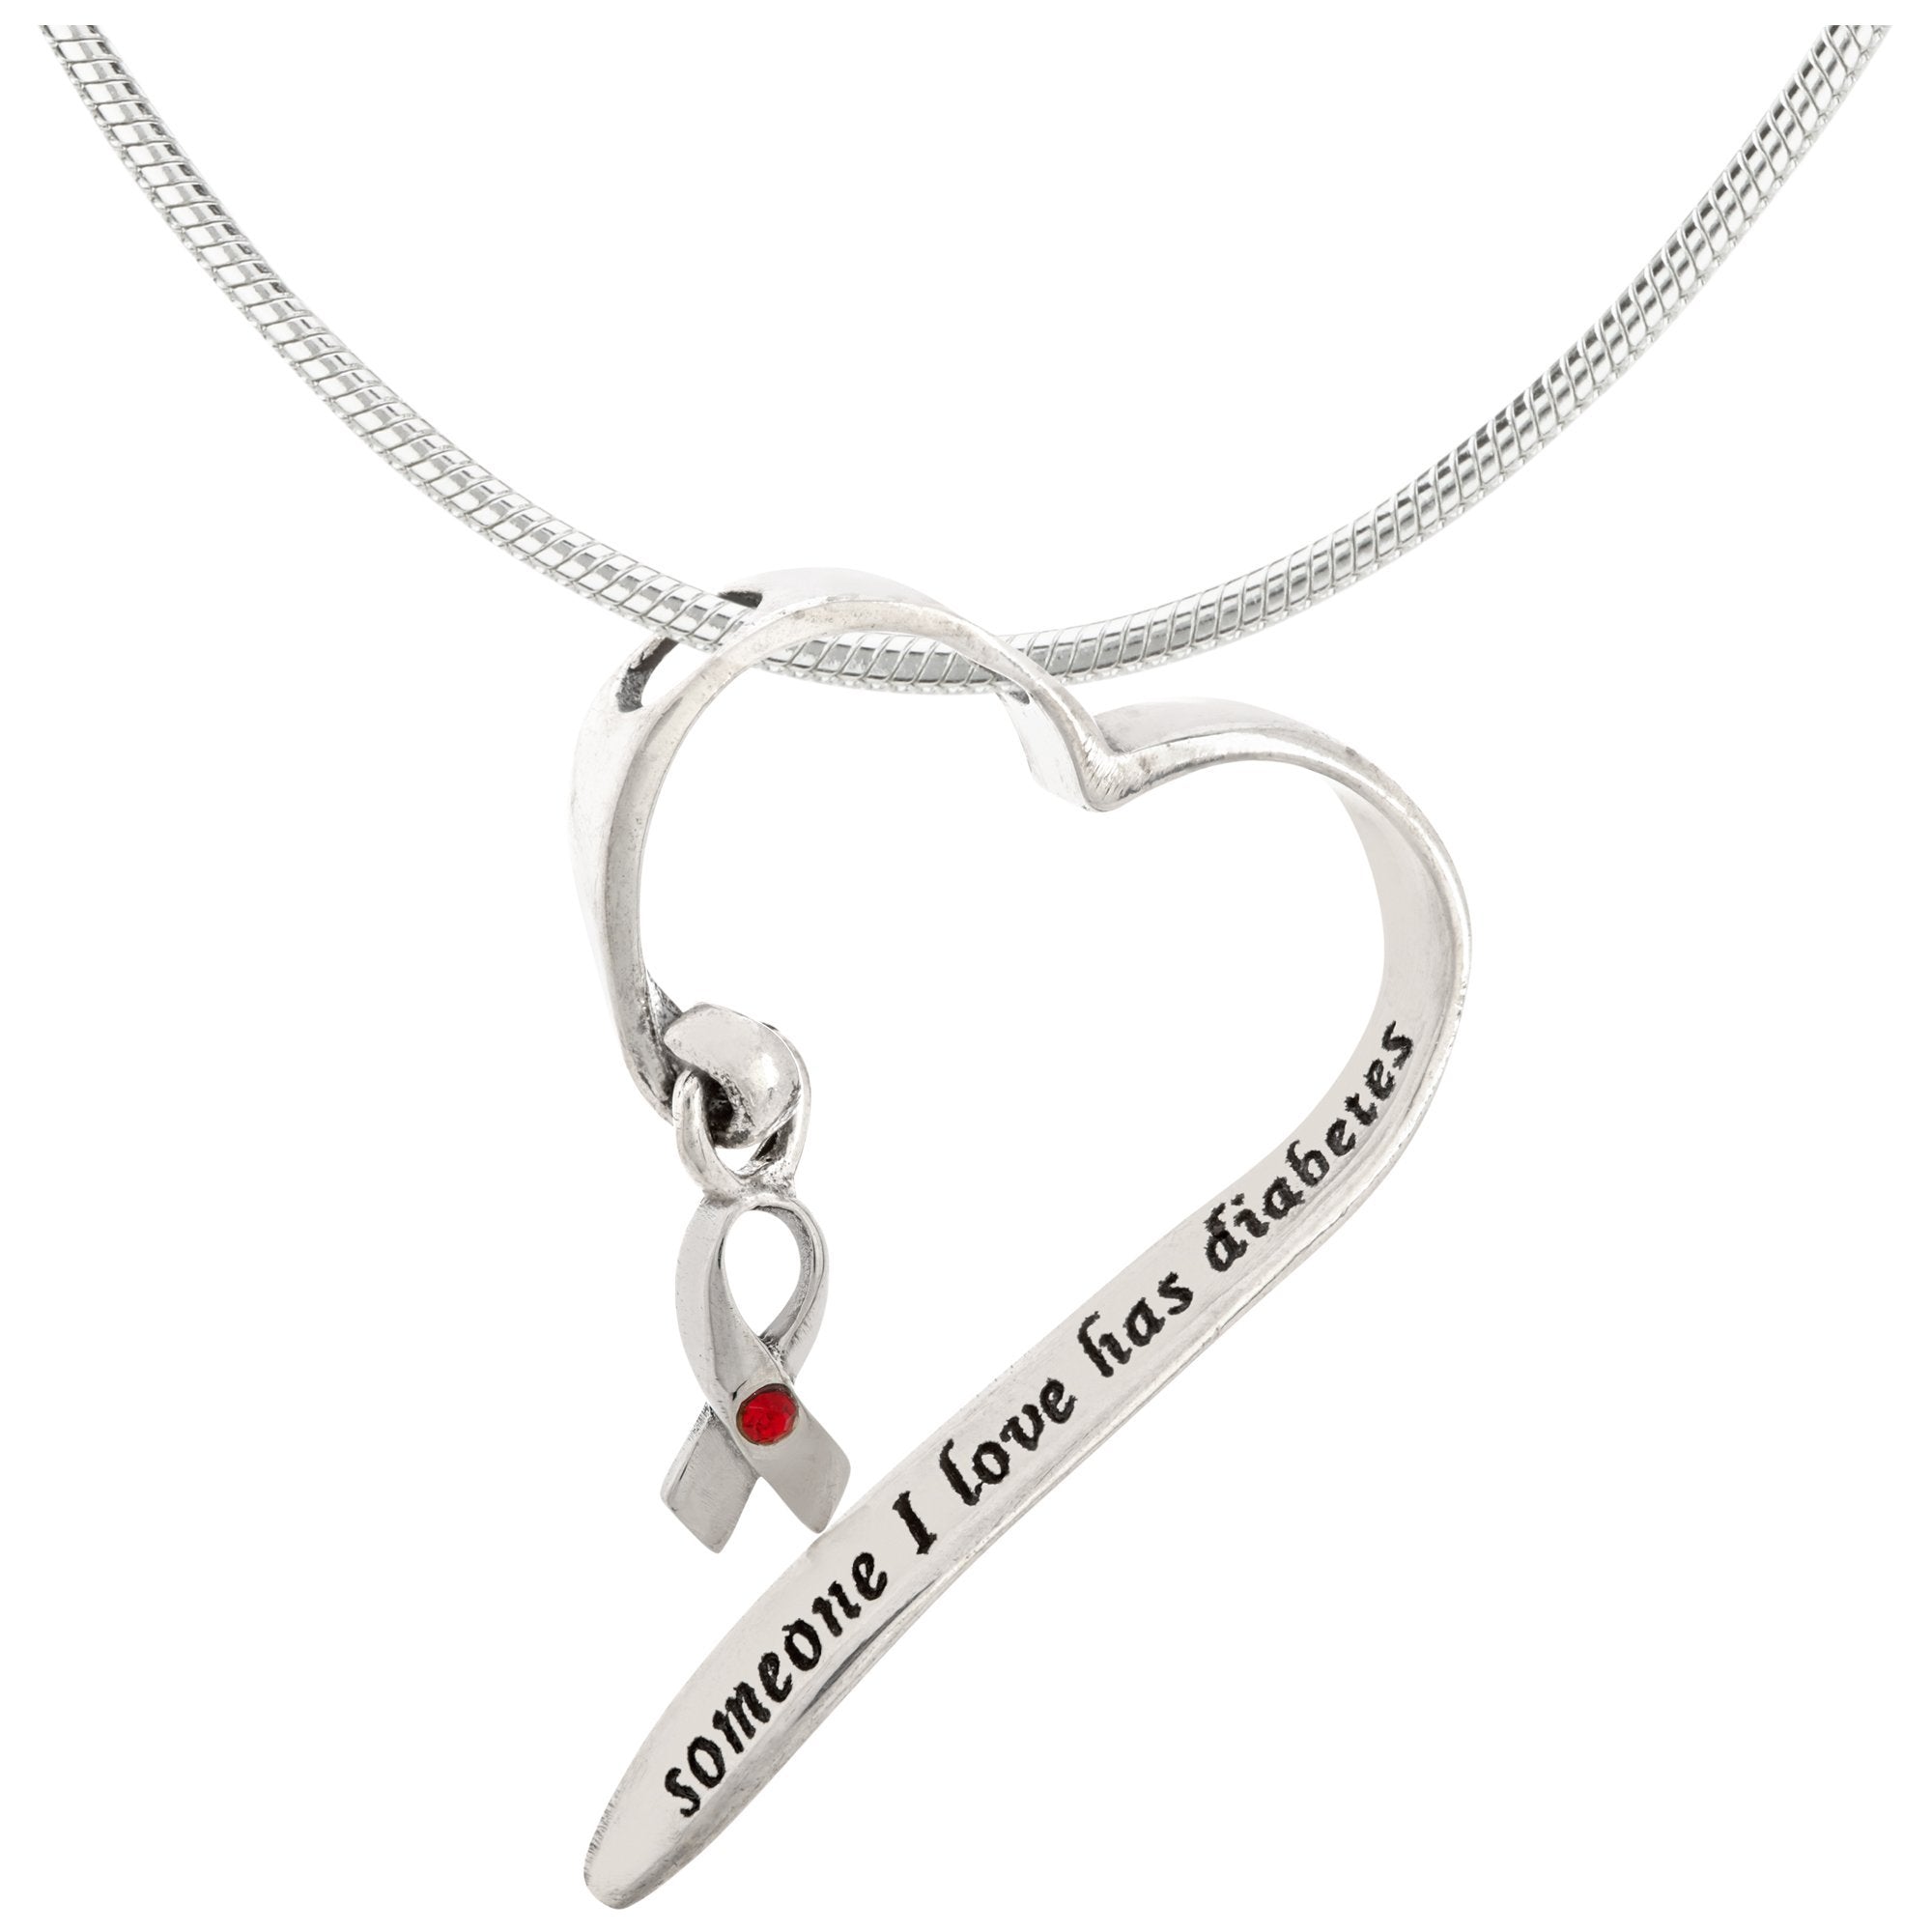 Someone I Love Has Diabetes Sterling Heart Necklace - Pendant Only